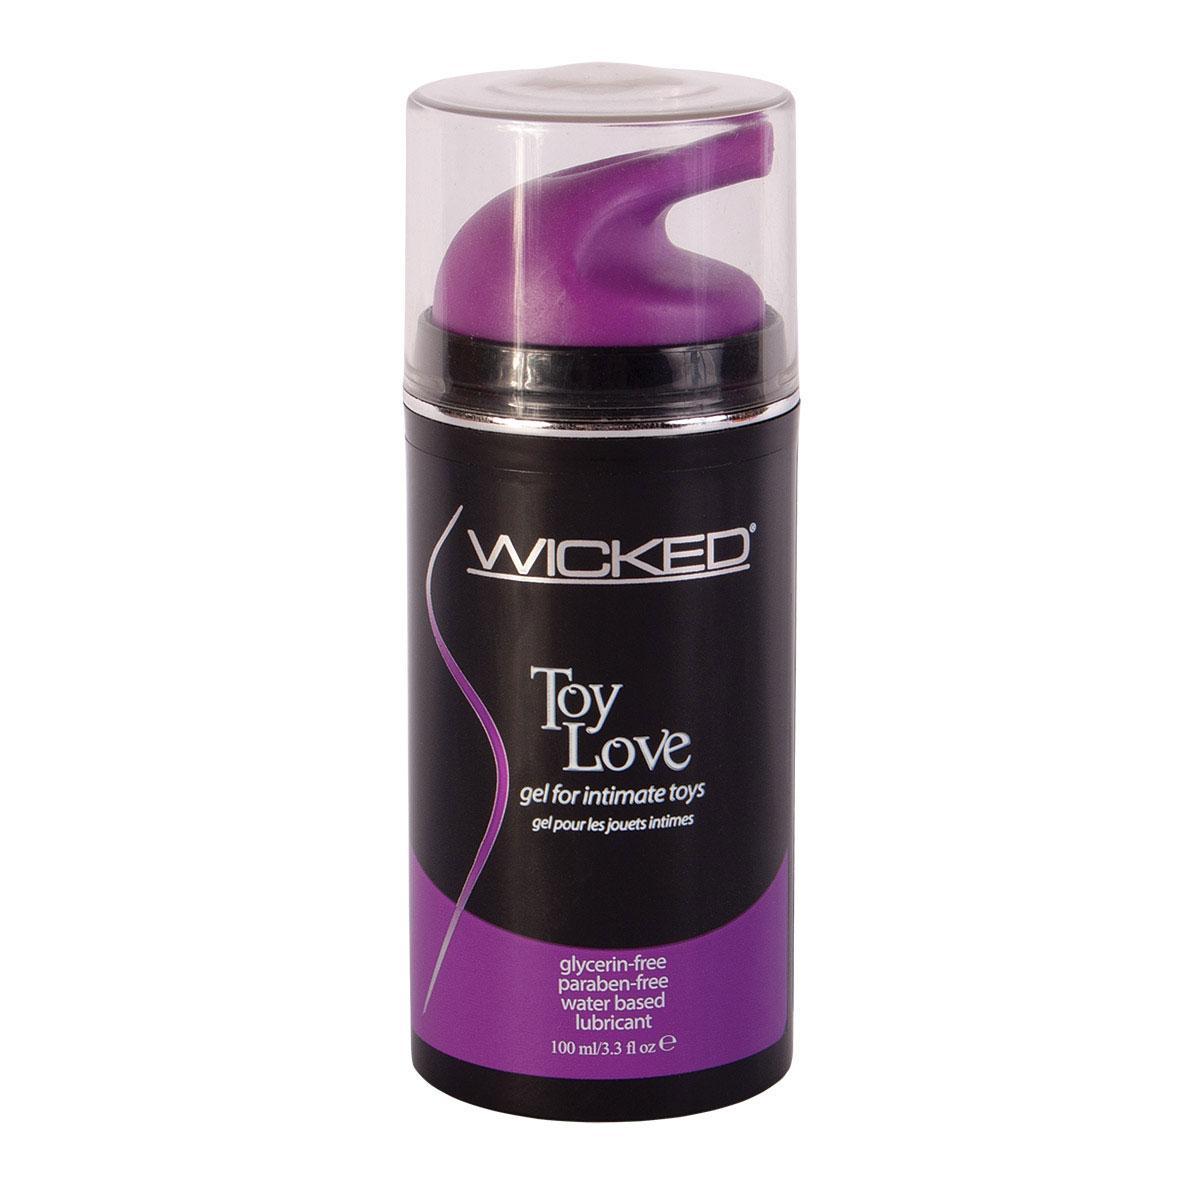 Wicked Toy Love Sex Toy Gel Lubricant - 3.3 oz - Kink Store